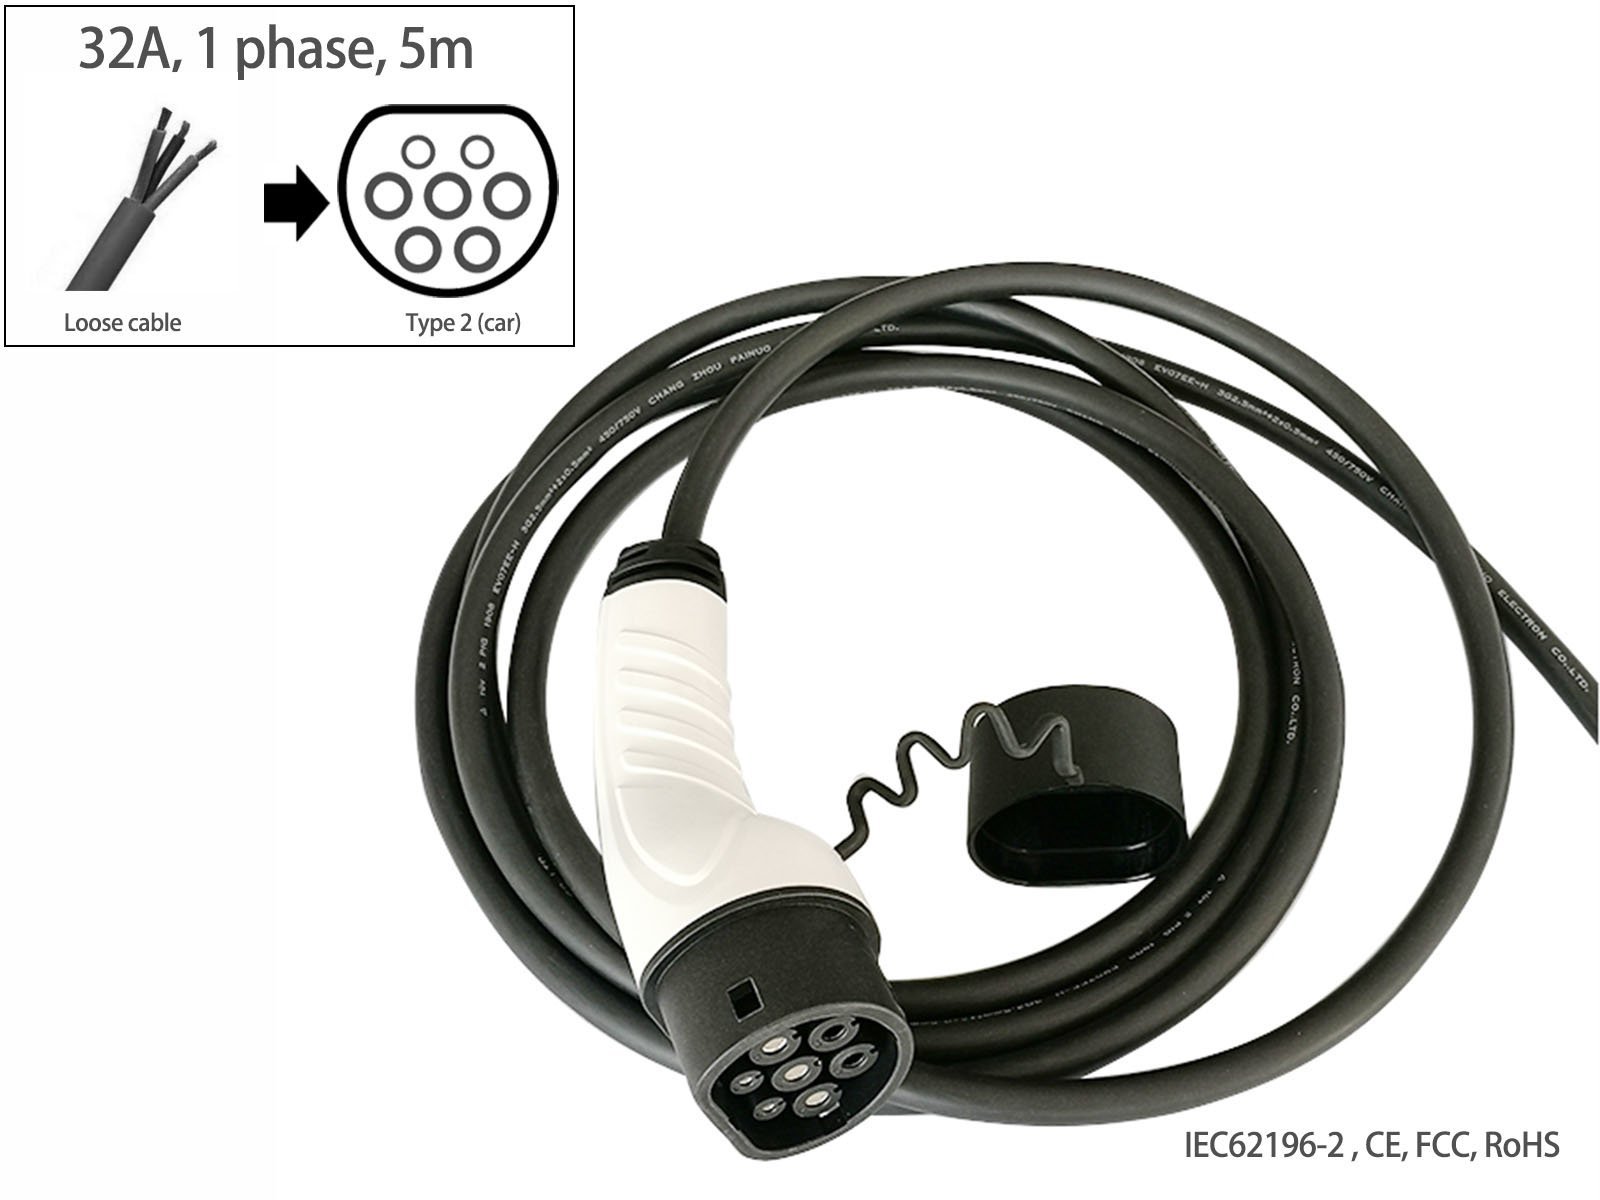 EV charging cable,Loose cable toType 2 (car),32A,single phase,5m,Fisher - Torque Alliance